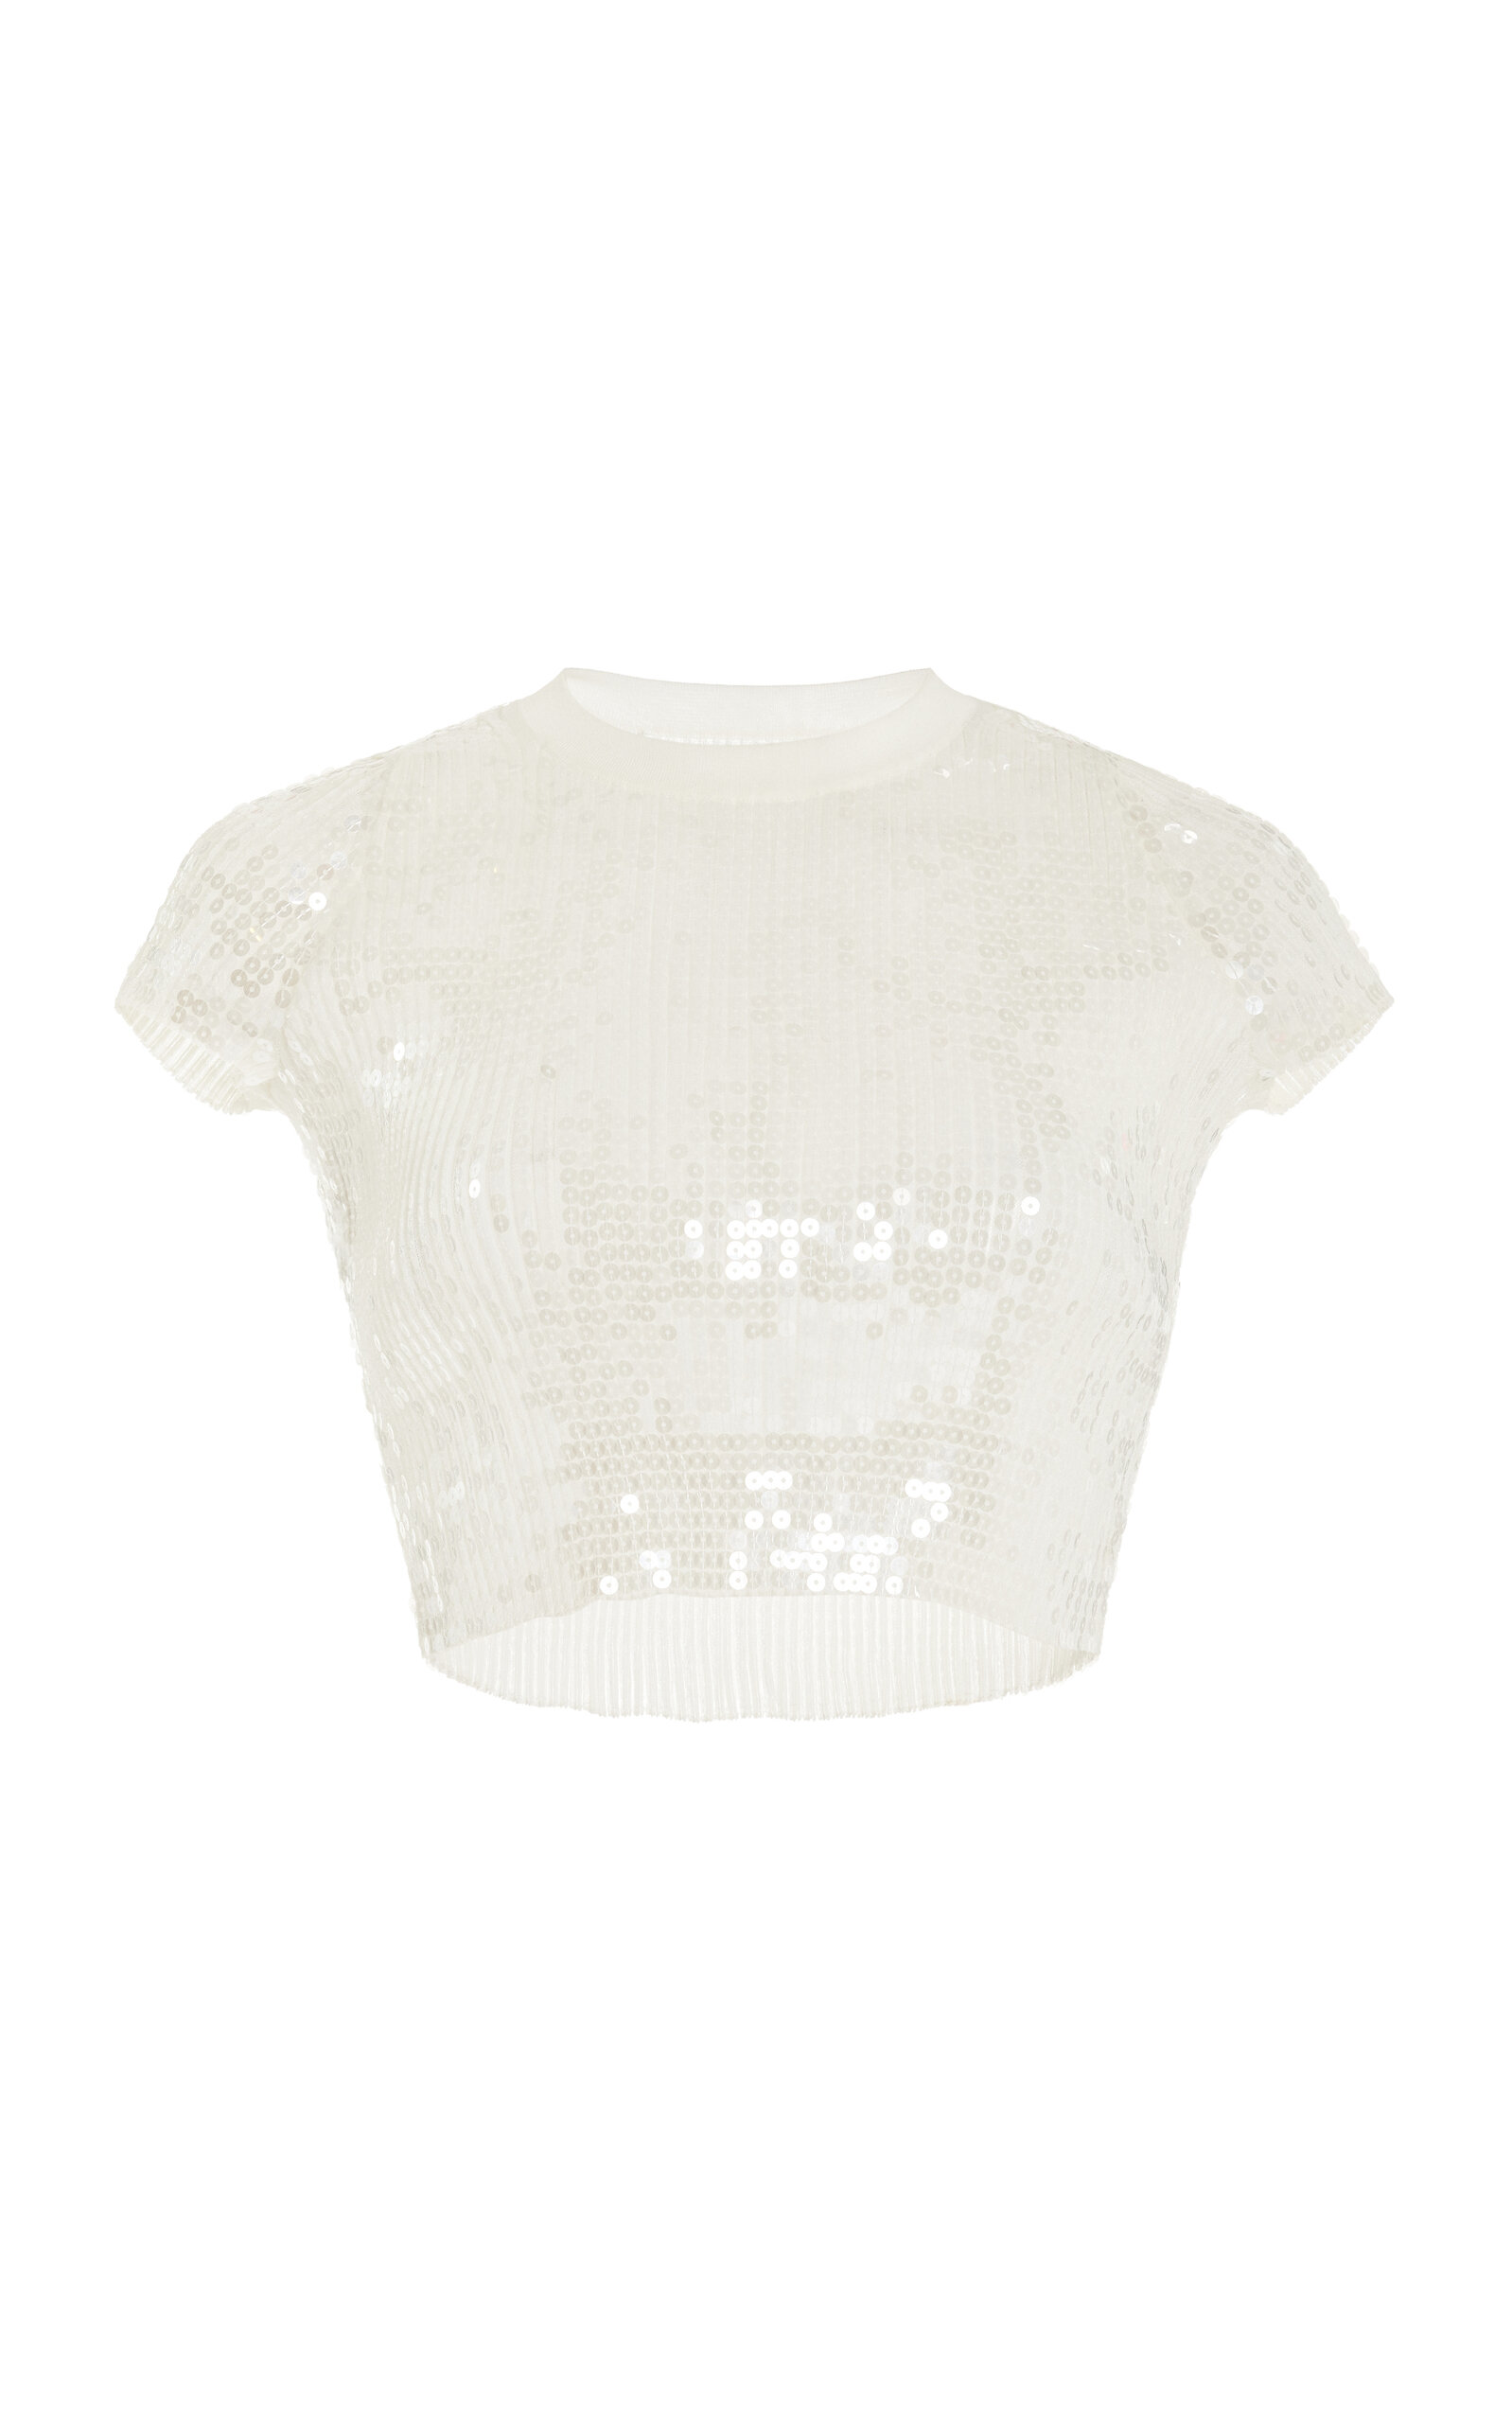 Alexander Wang Women's Sequined Cropped Baby T-Shirt